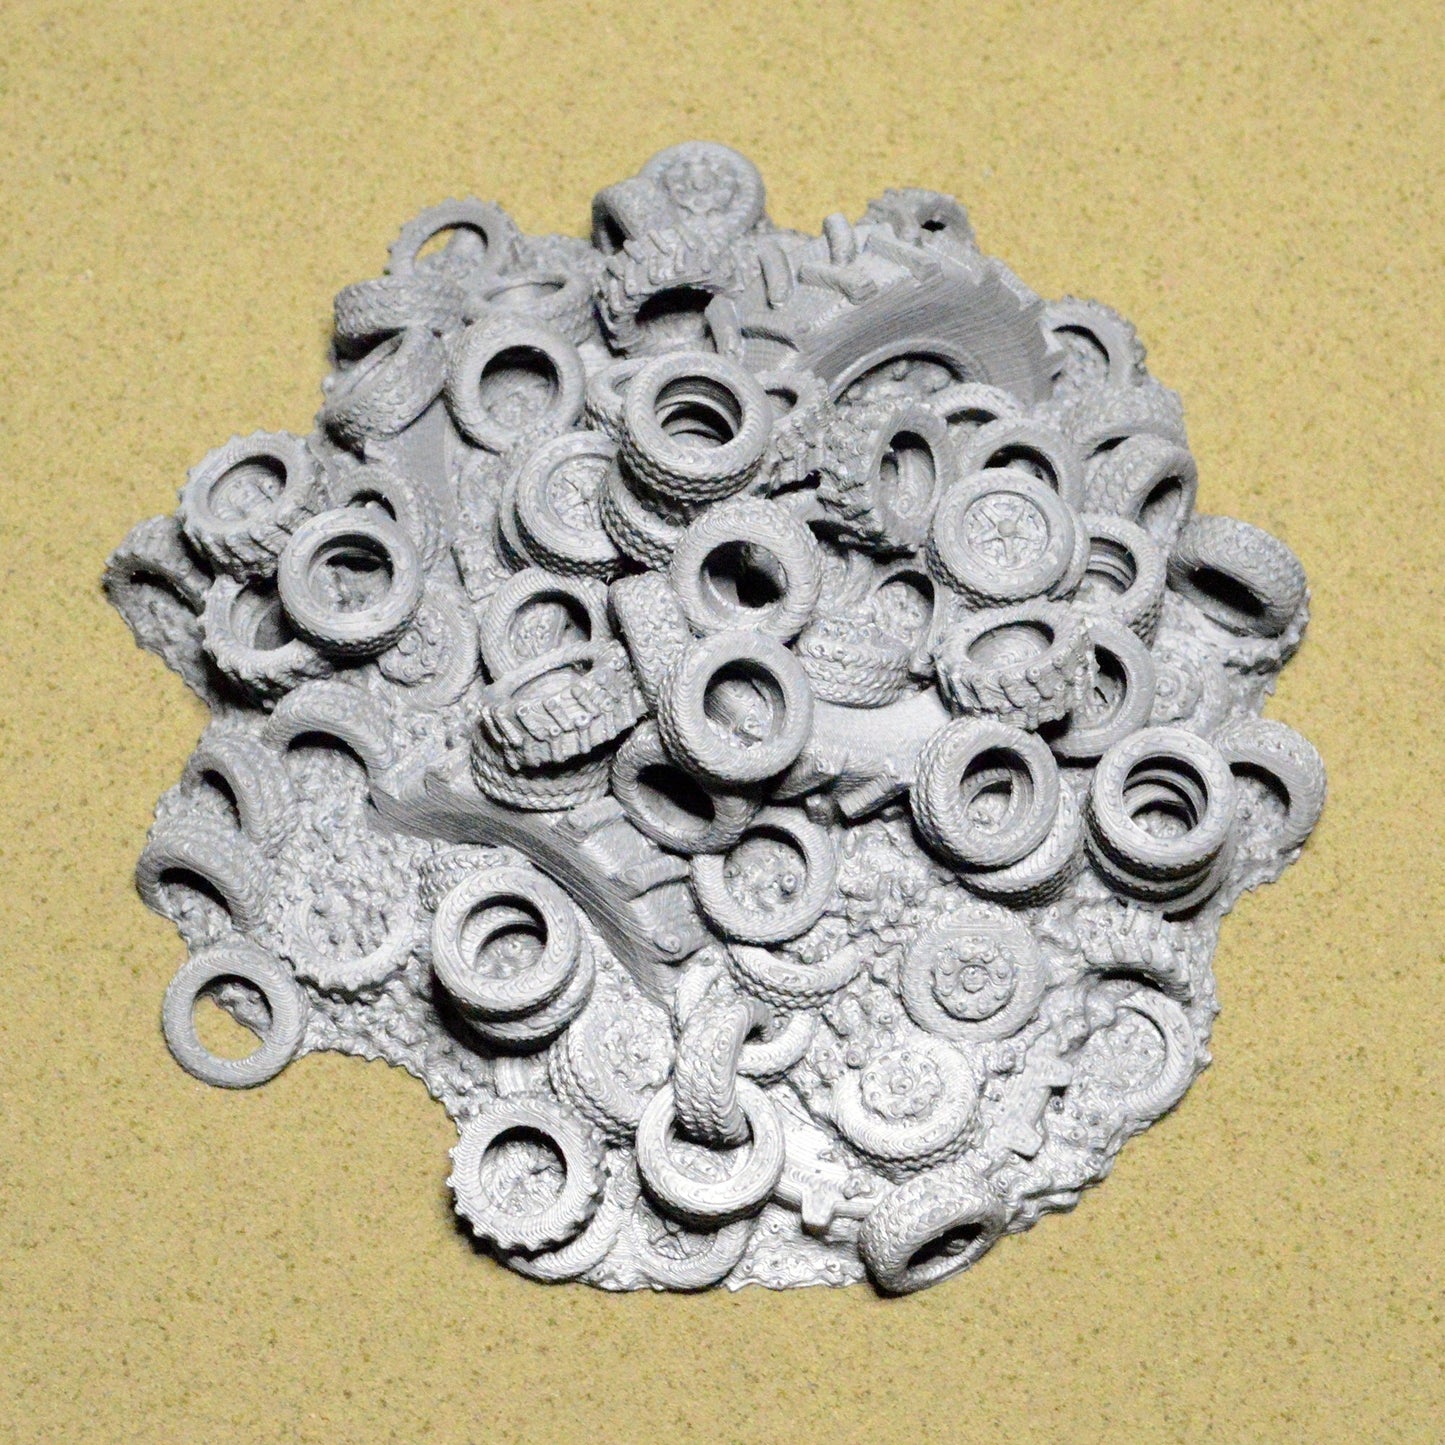 Scrapyard Miniature Tire Pile 15mm 20mm 28mm 32mm for Gaslands Terrain, Urban Fallout Wasteland Post-Apocalyptic, This is Not a Test